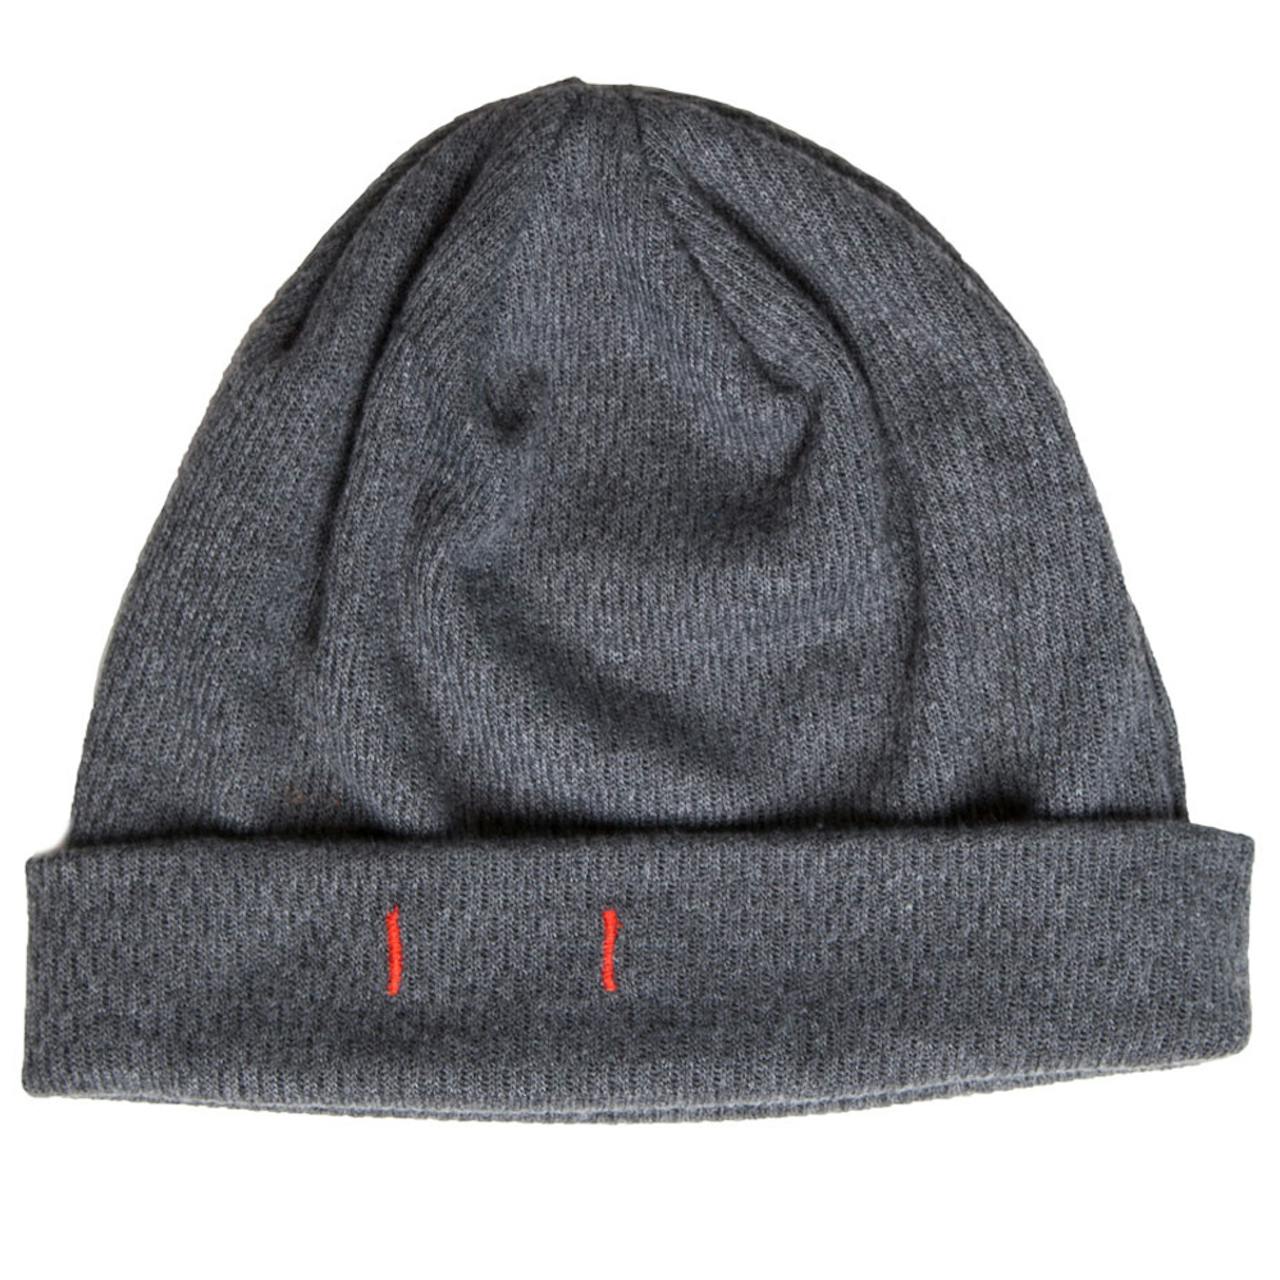 Be Right on Top Grey Beanie